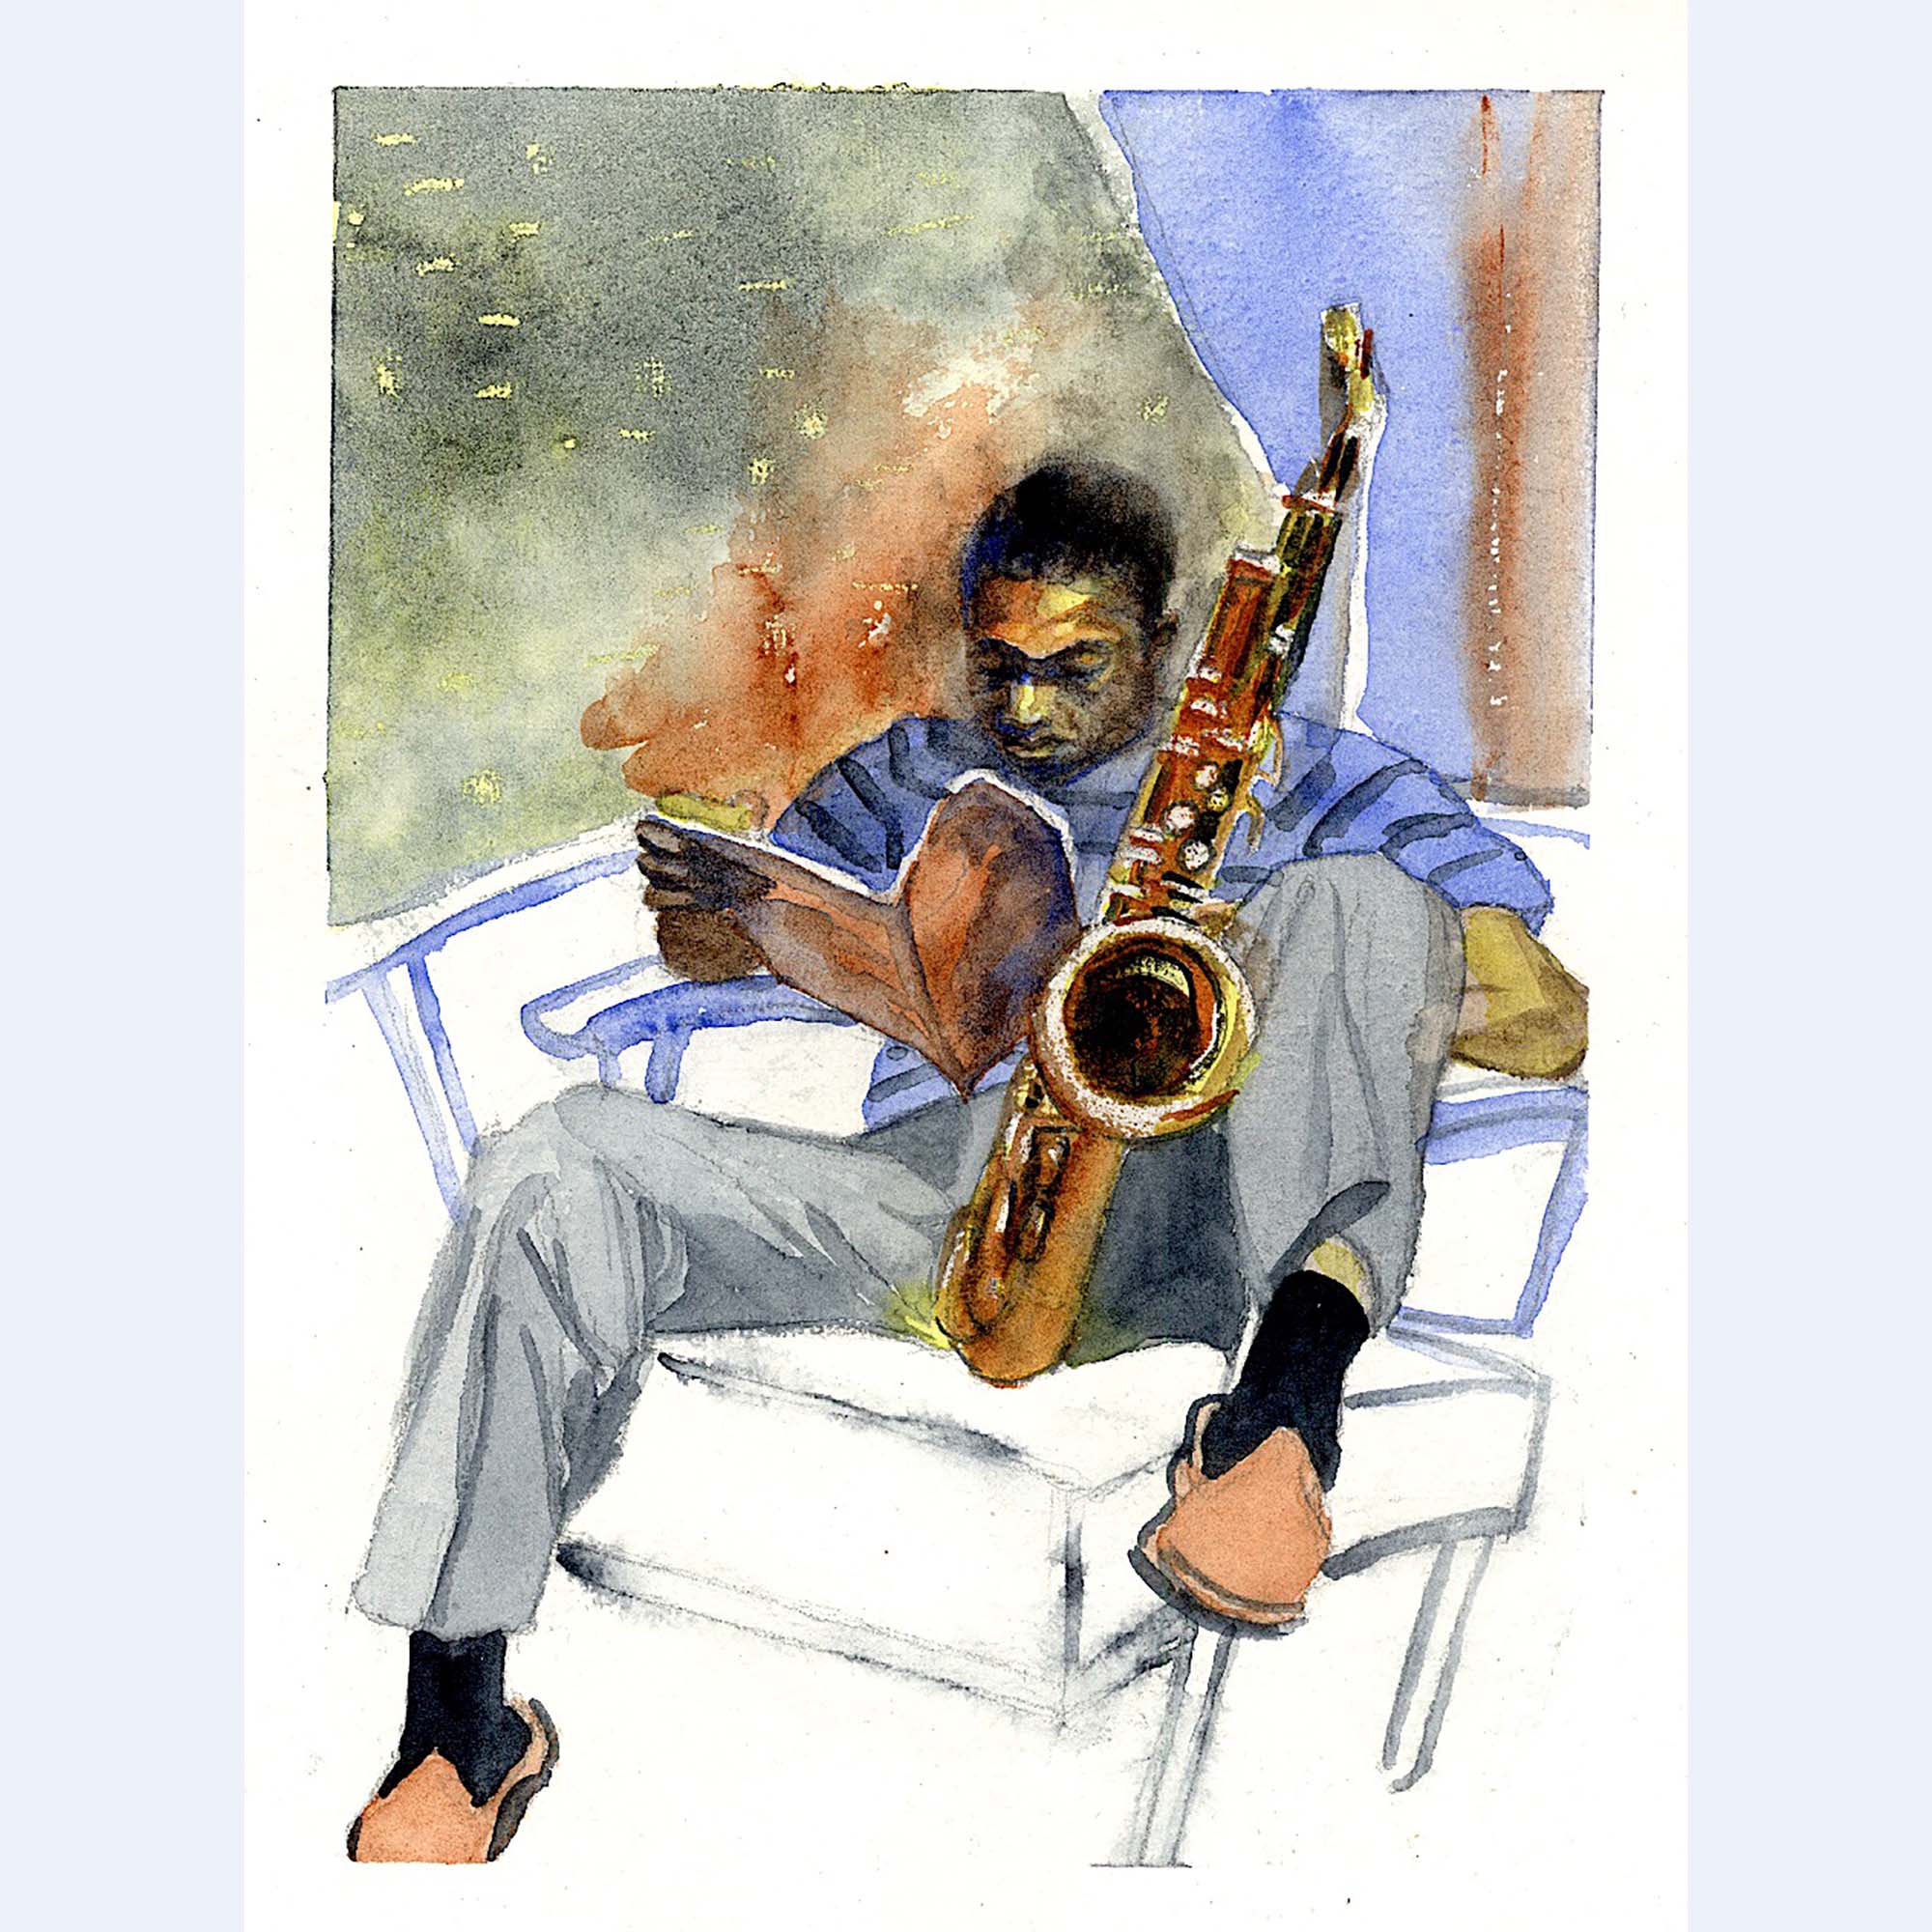 john coltrane sitting in a chair, reading and holding a saxophone